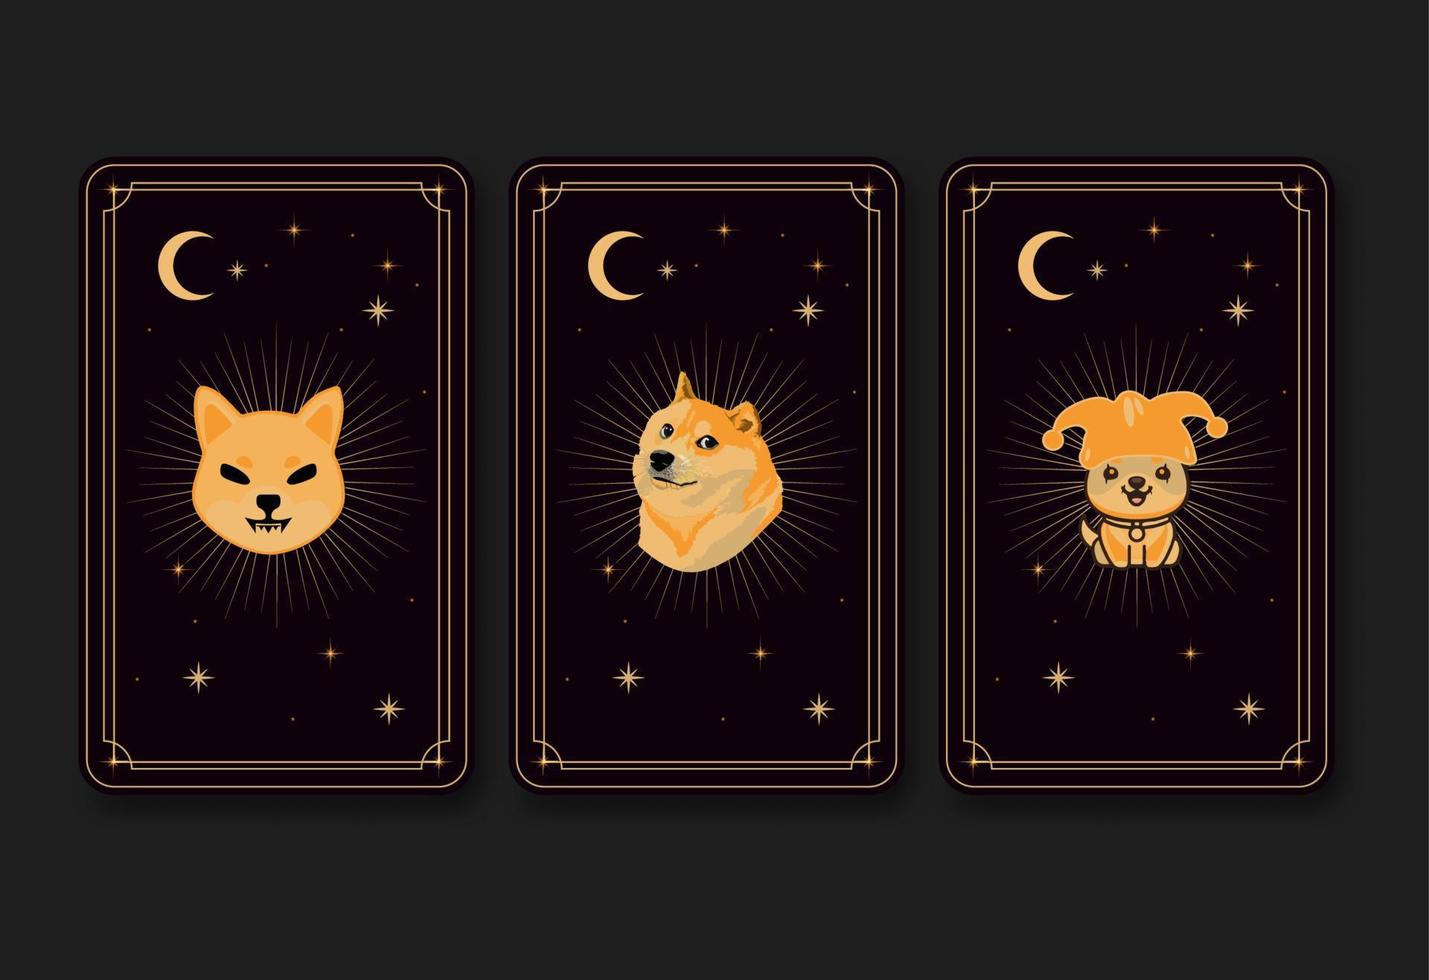 doge coin meme cryptocurrency tarot card poster design vector